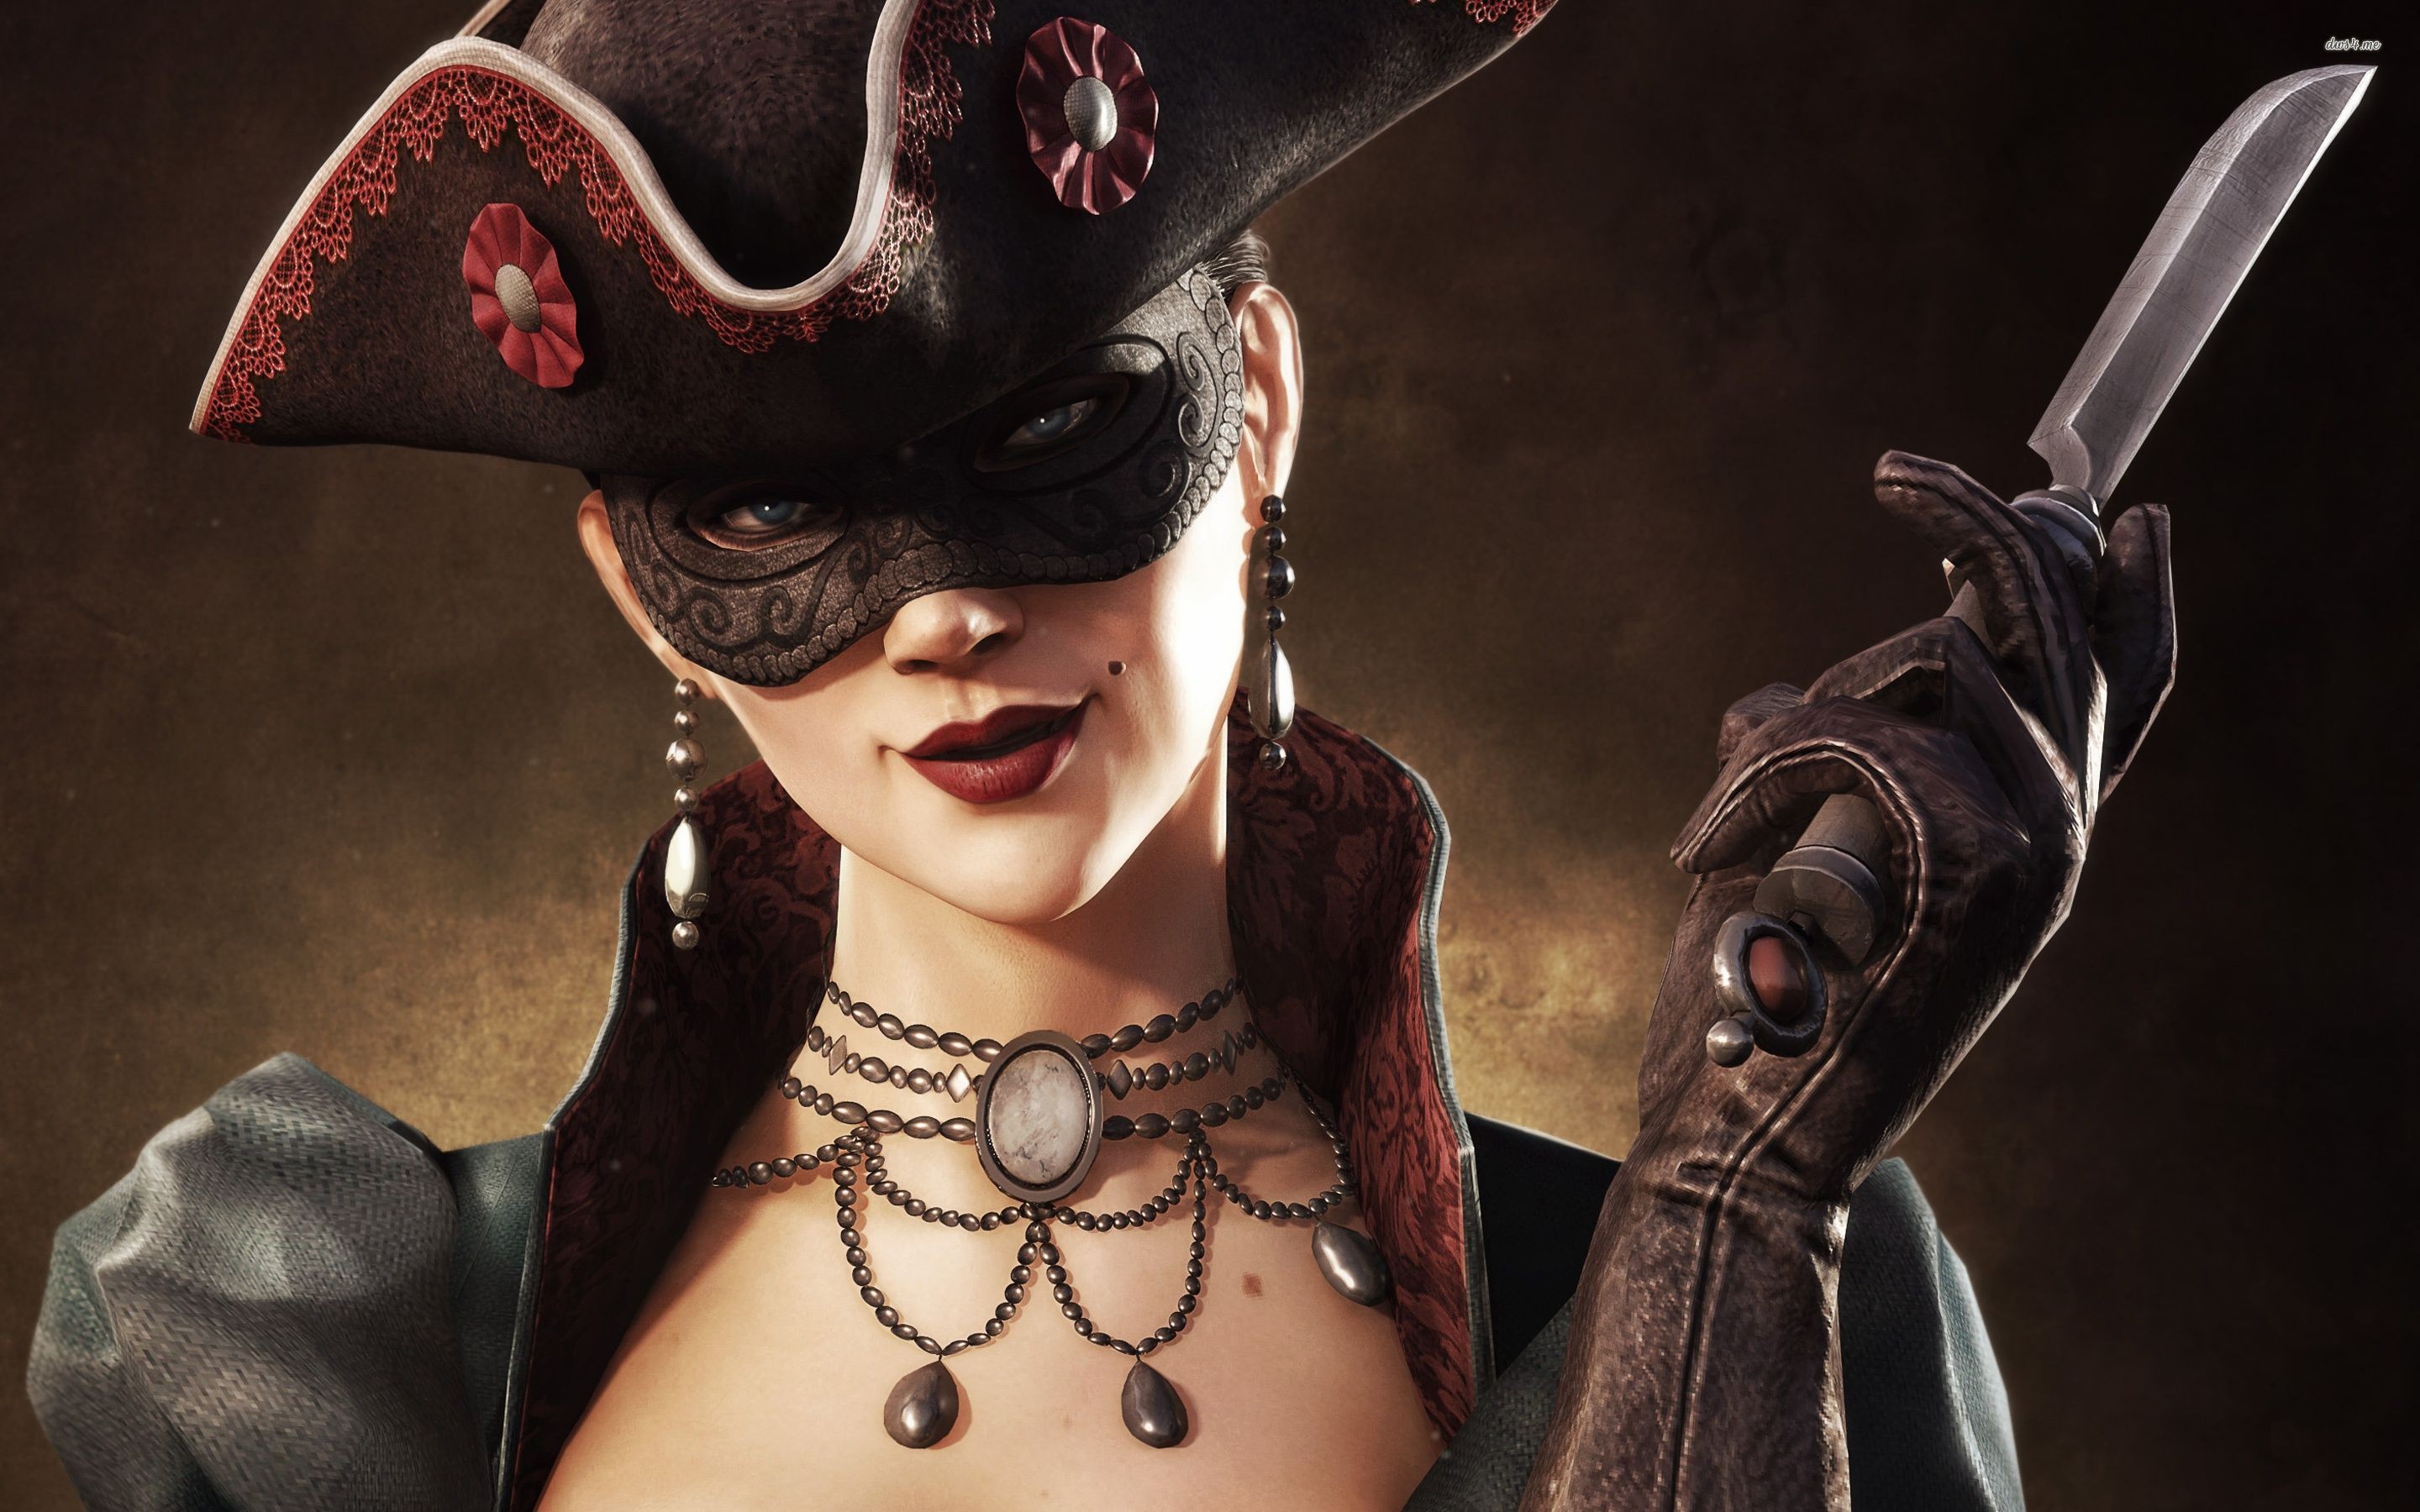 General 2880x1800 Assassin's Creed fantasy girl knife mask video games video game girls PC gaming hat women with hats looking at viewer necklace red lipstick video game art